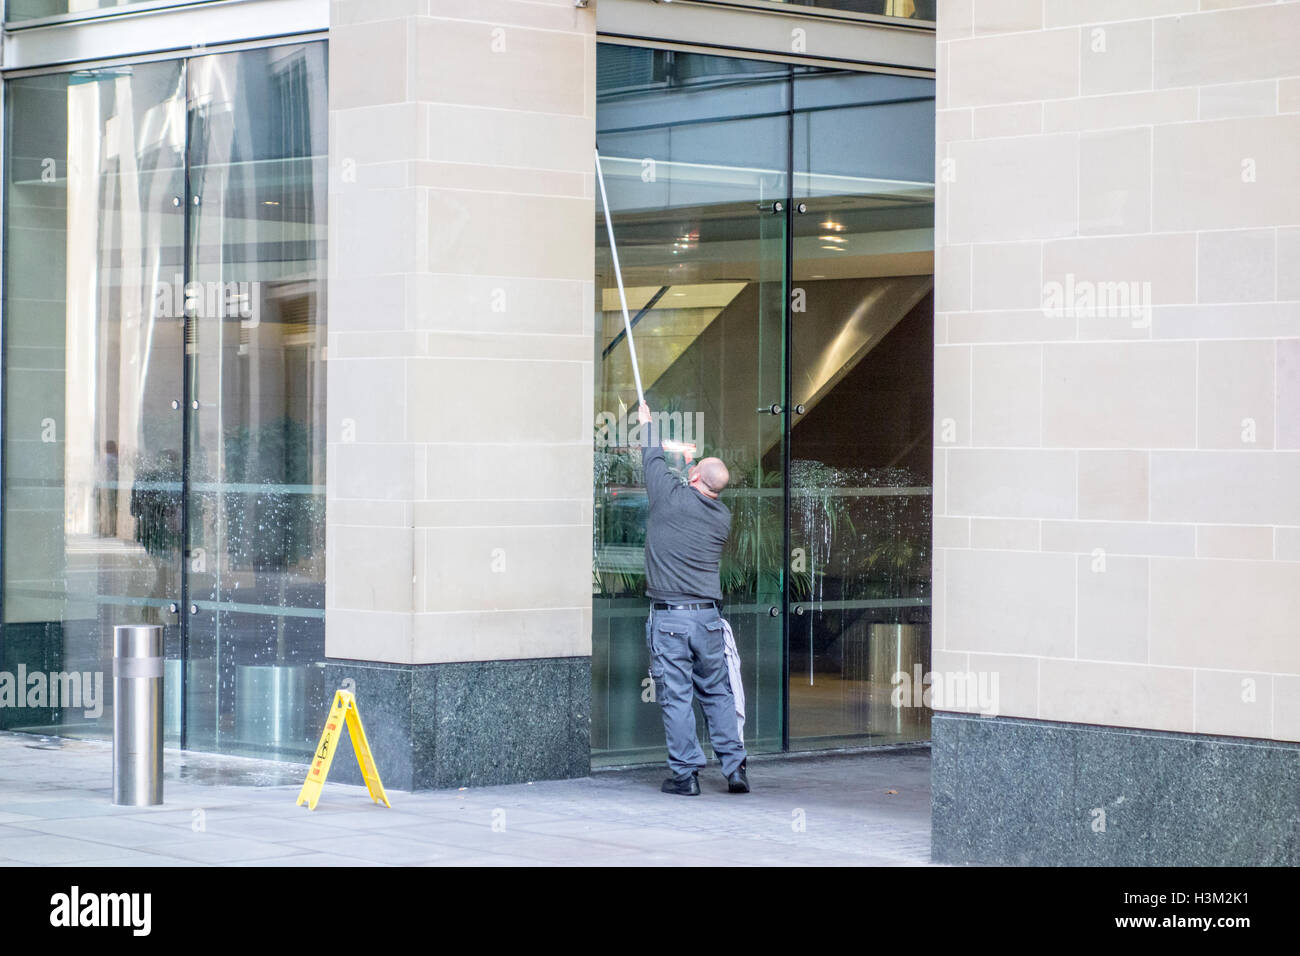 Window cleaner cleaning windows on an office building in London Stock Photo